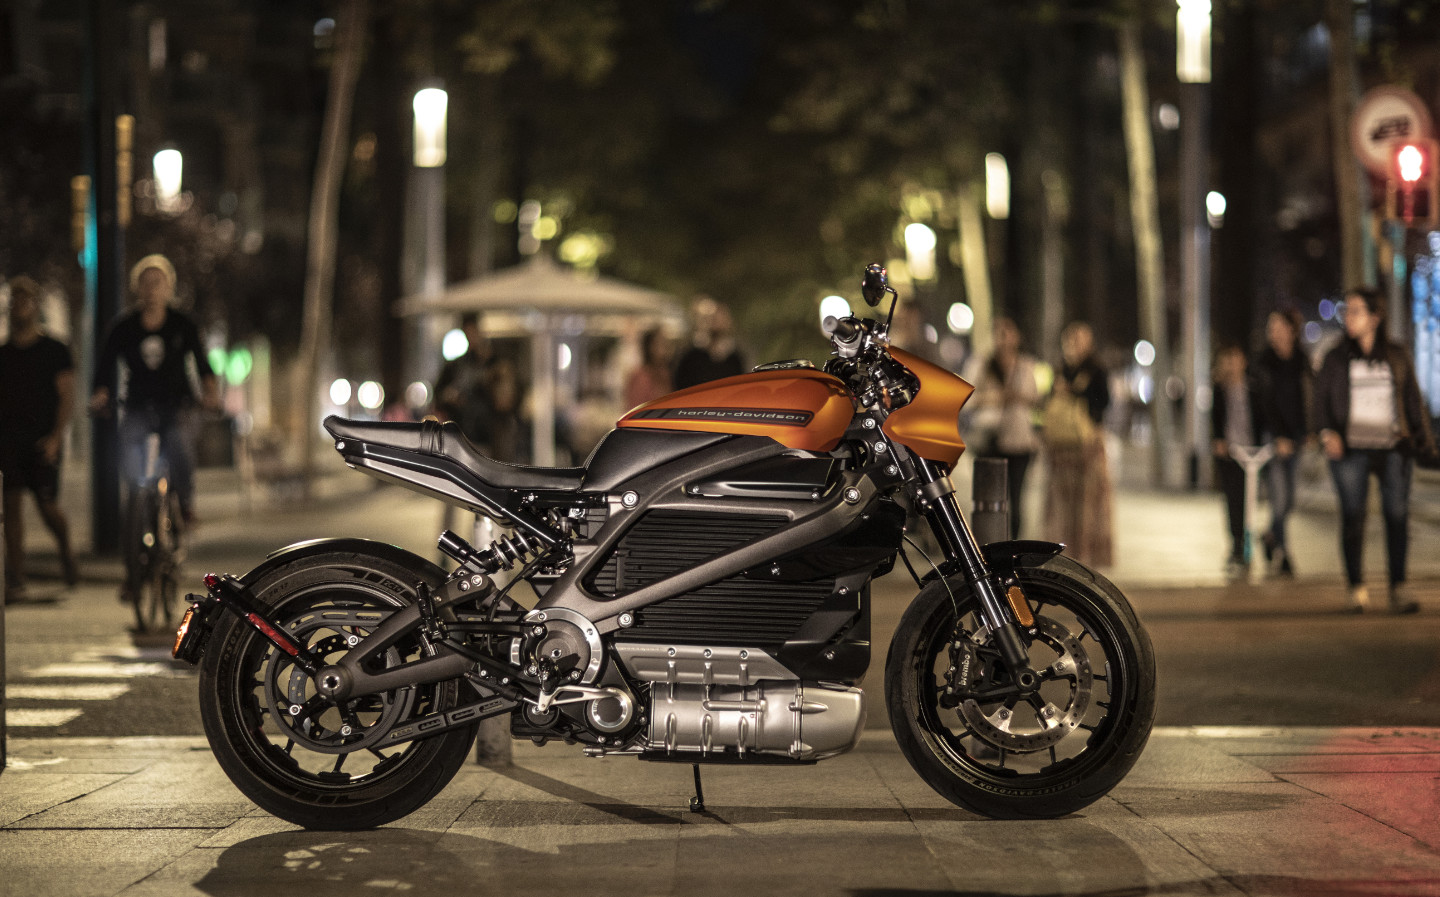 LiveWire One electric motorcycle makes its debut, but don't call